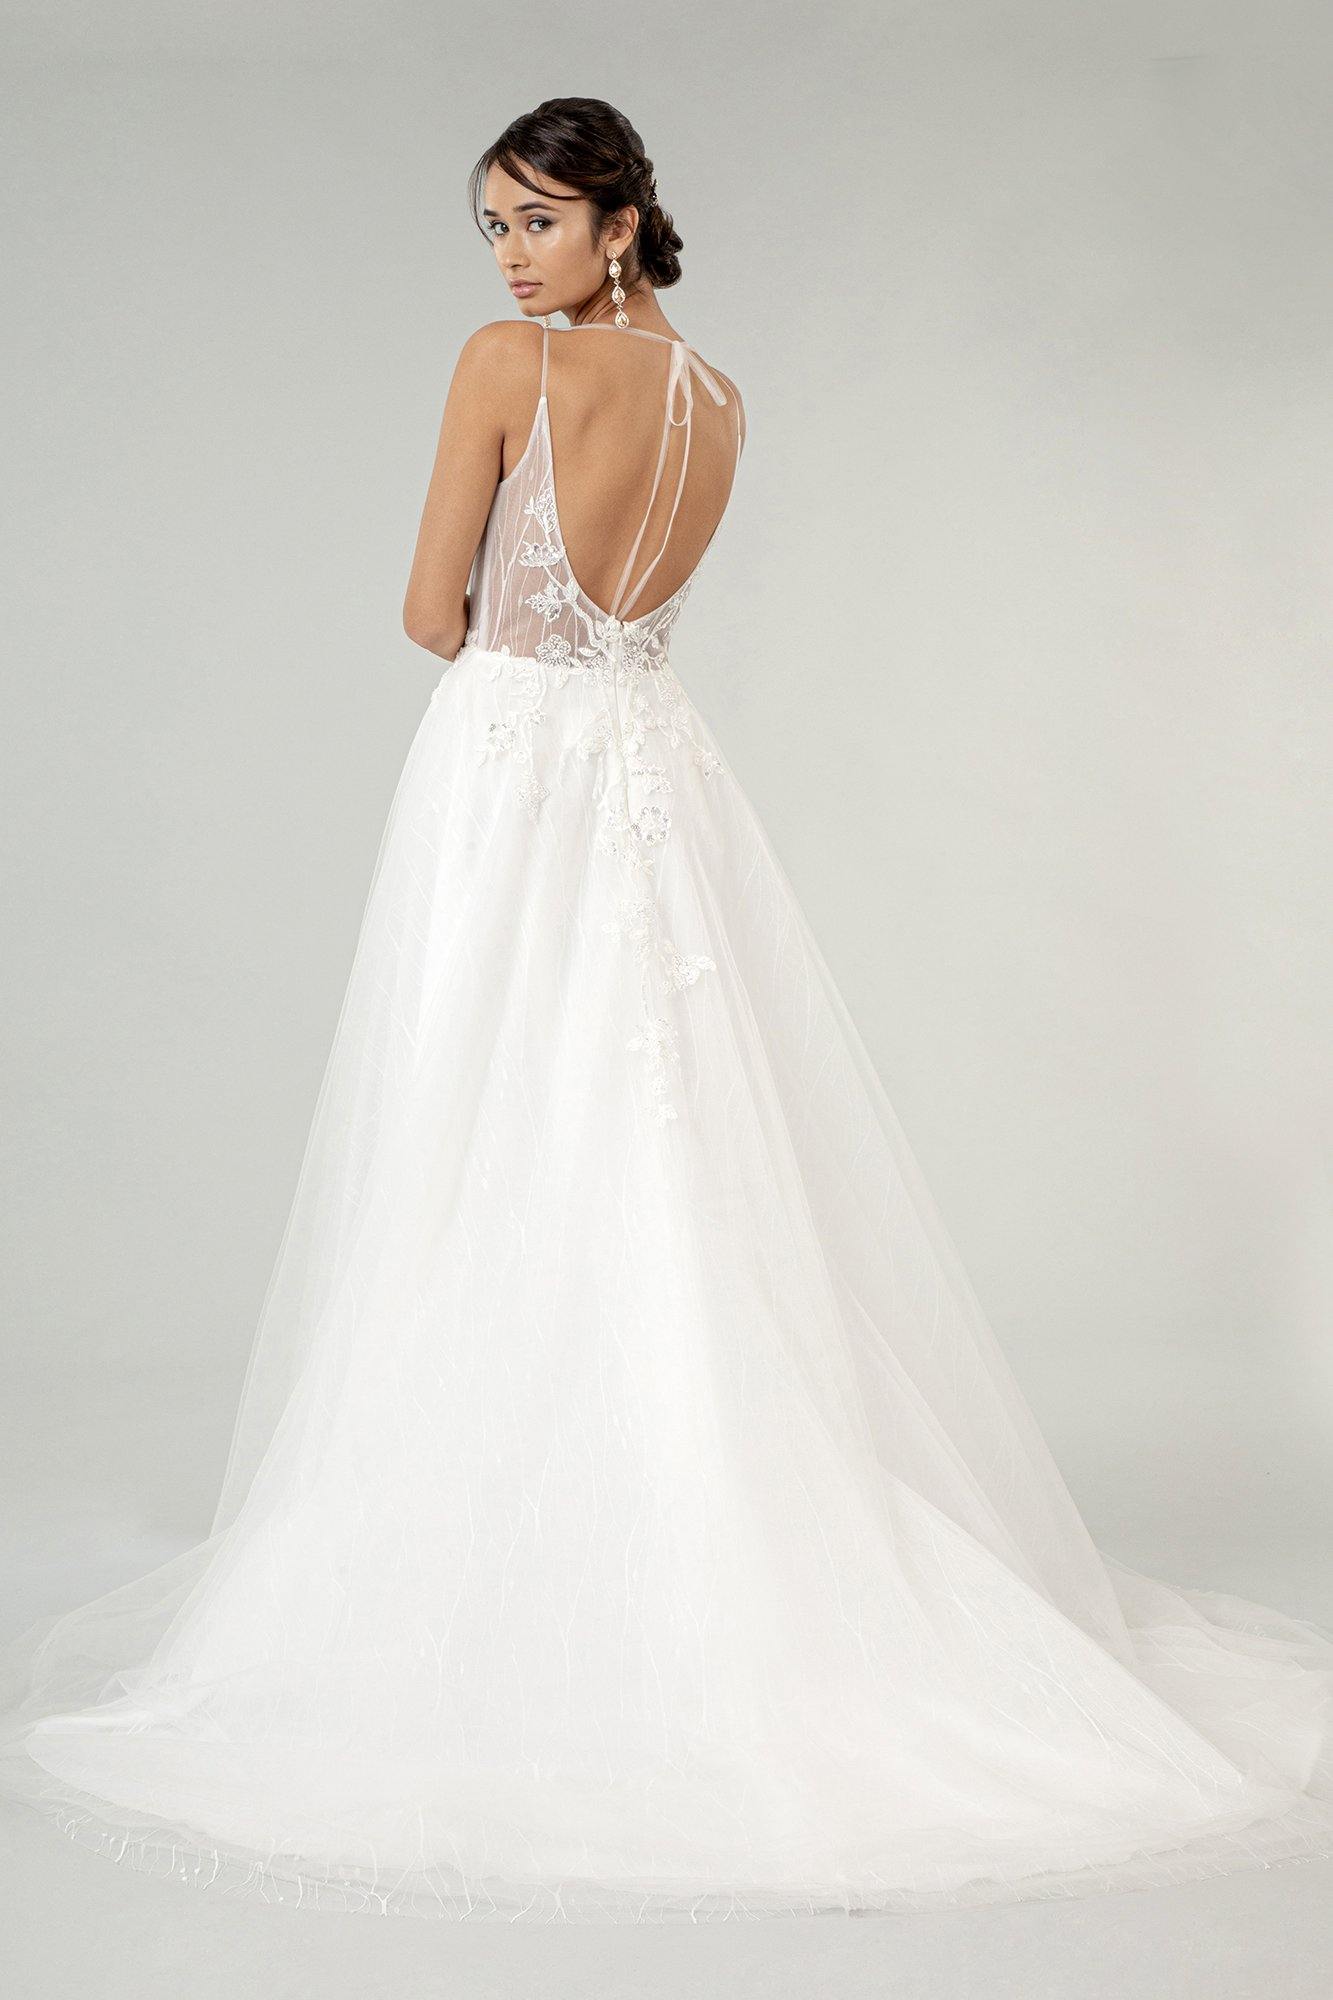 Long Spaghetti Strap Sheer Bodice Wedding Gown - The Dress Outlet